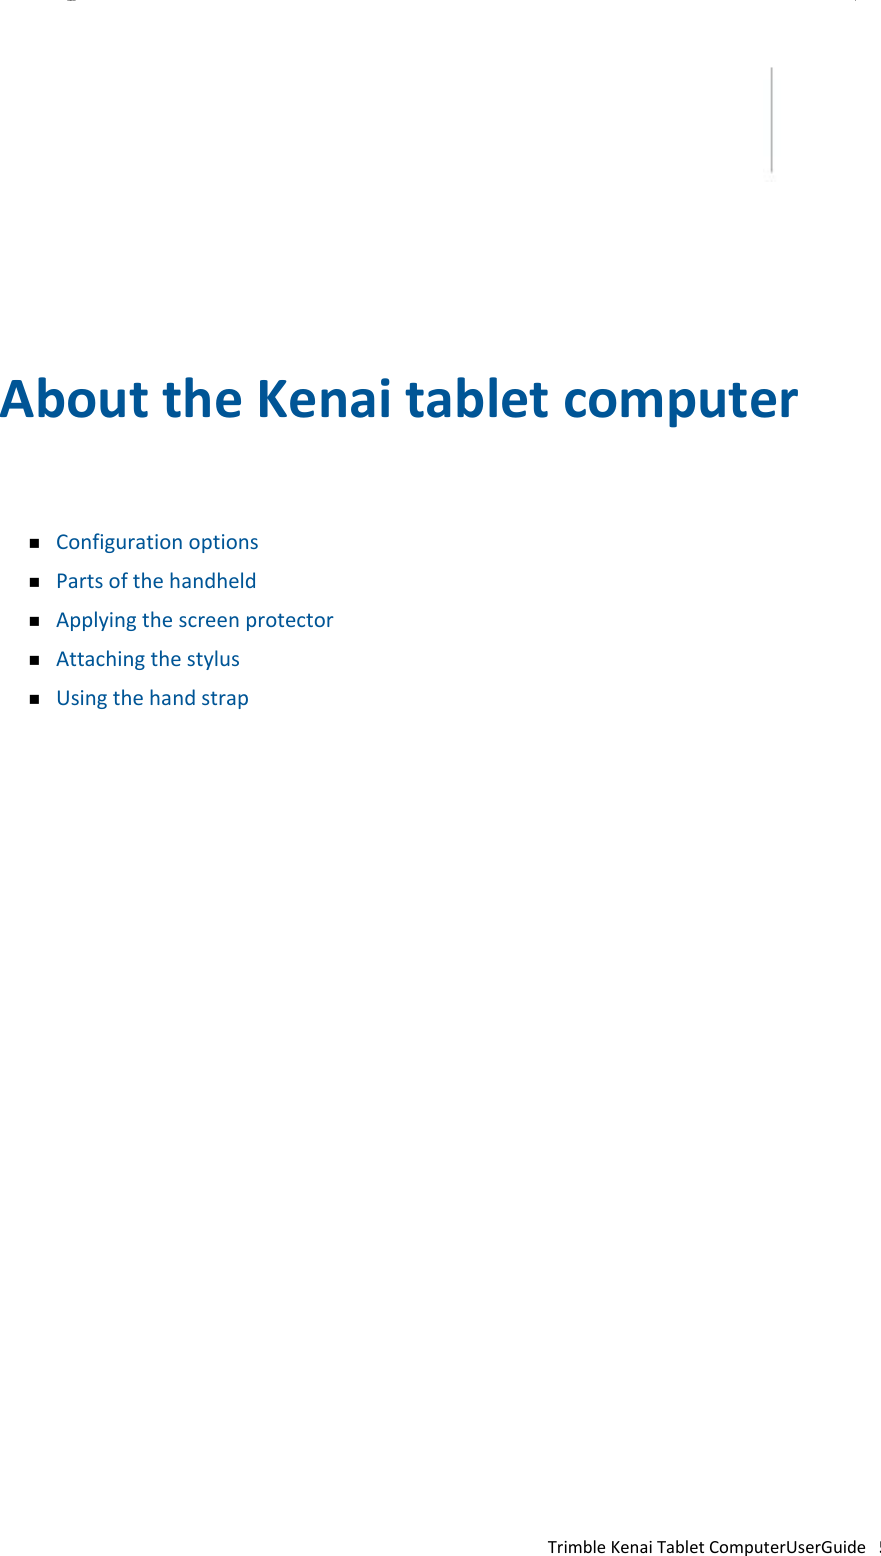 CHAPTER 1                  AbouttheKenaitabletcomputer     ConfigurationoptionsPartsofthehandheldApplyingthescreenprotectorAttachingthestylusUsingthehandstrap                                       TrimbleKenaiTabletComputerUserGuide5 